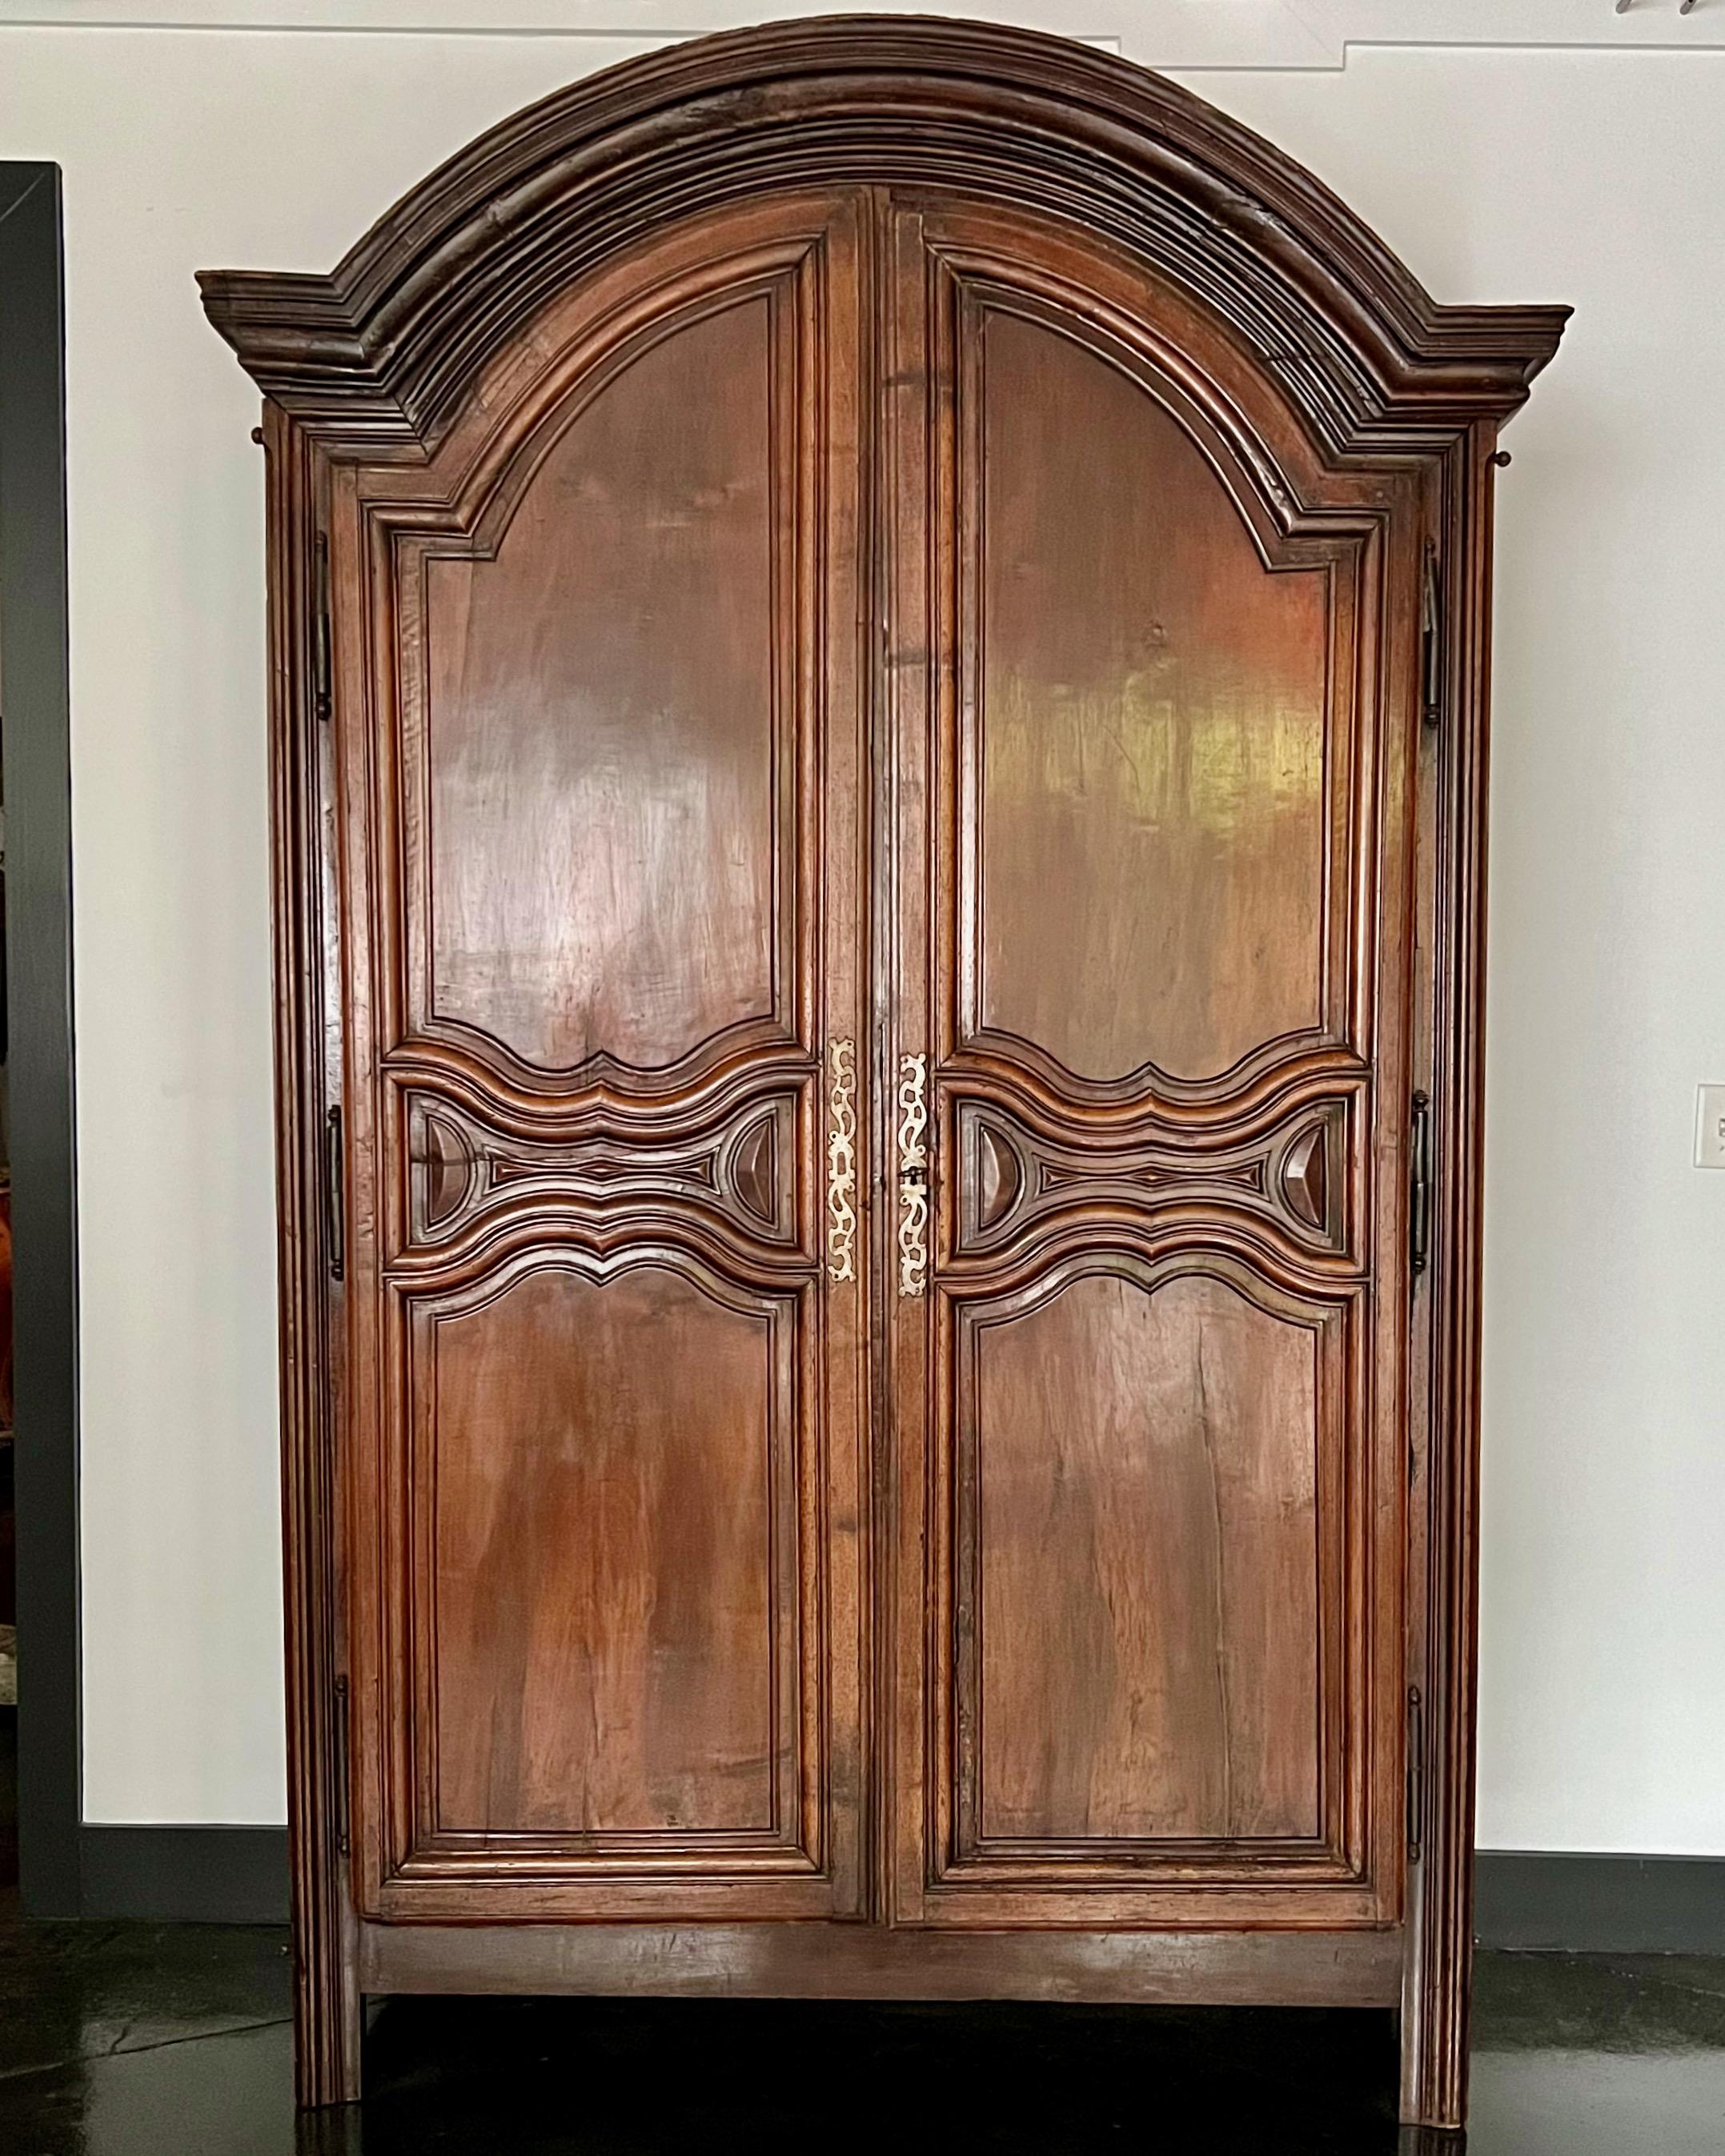 18th Century French walnut armoire with doors strongly moulded in many curves and counter-curves. The “chapeau de gendarme” cornice richly carved follows curves in all 3 dimensions. Beautiful ironwork with large hinges and original lock.
France ca